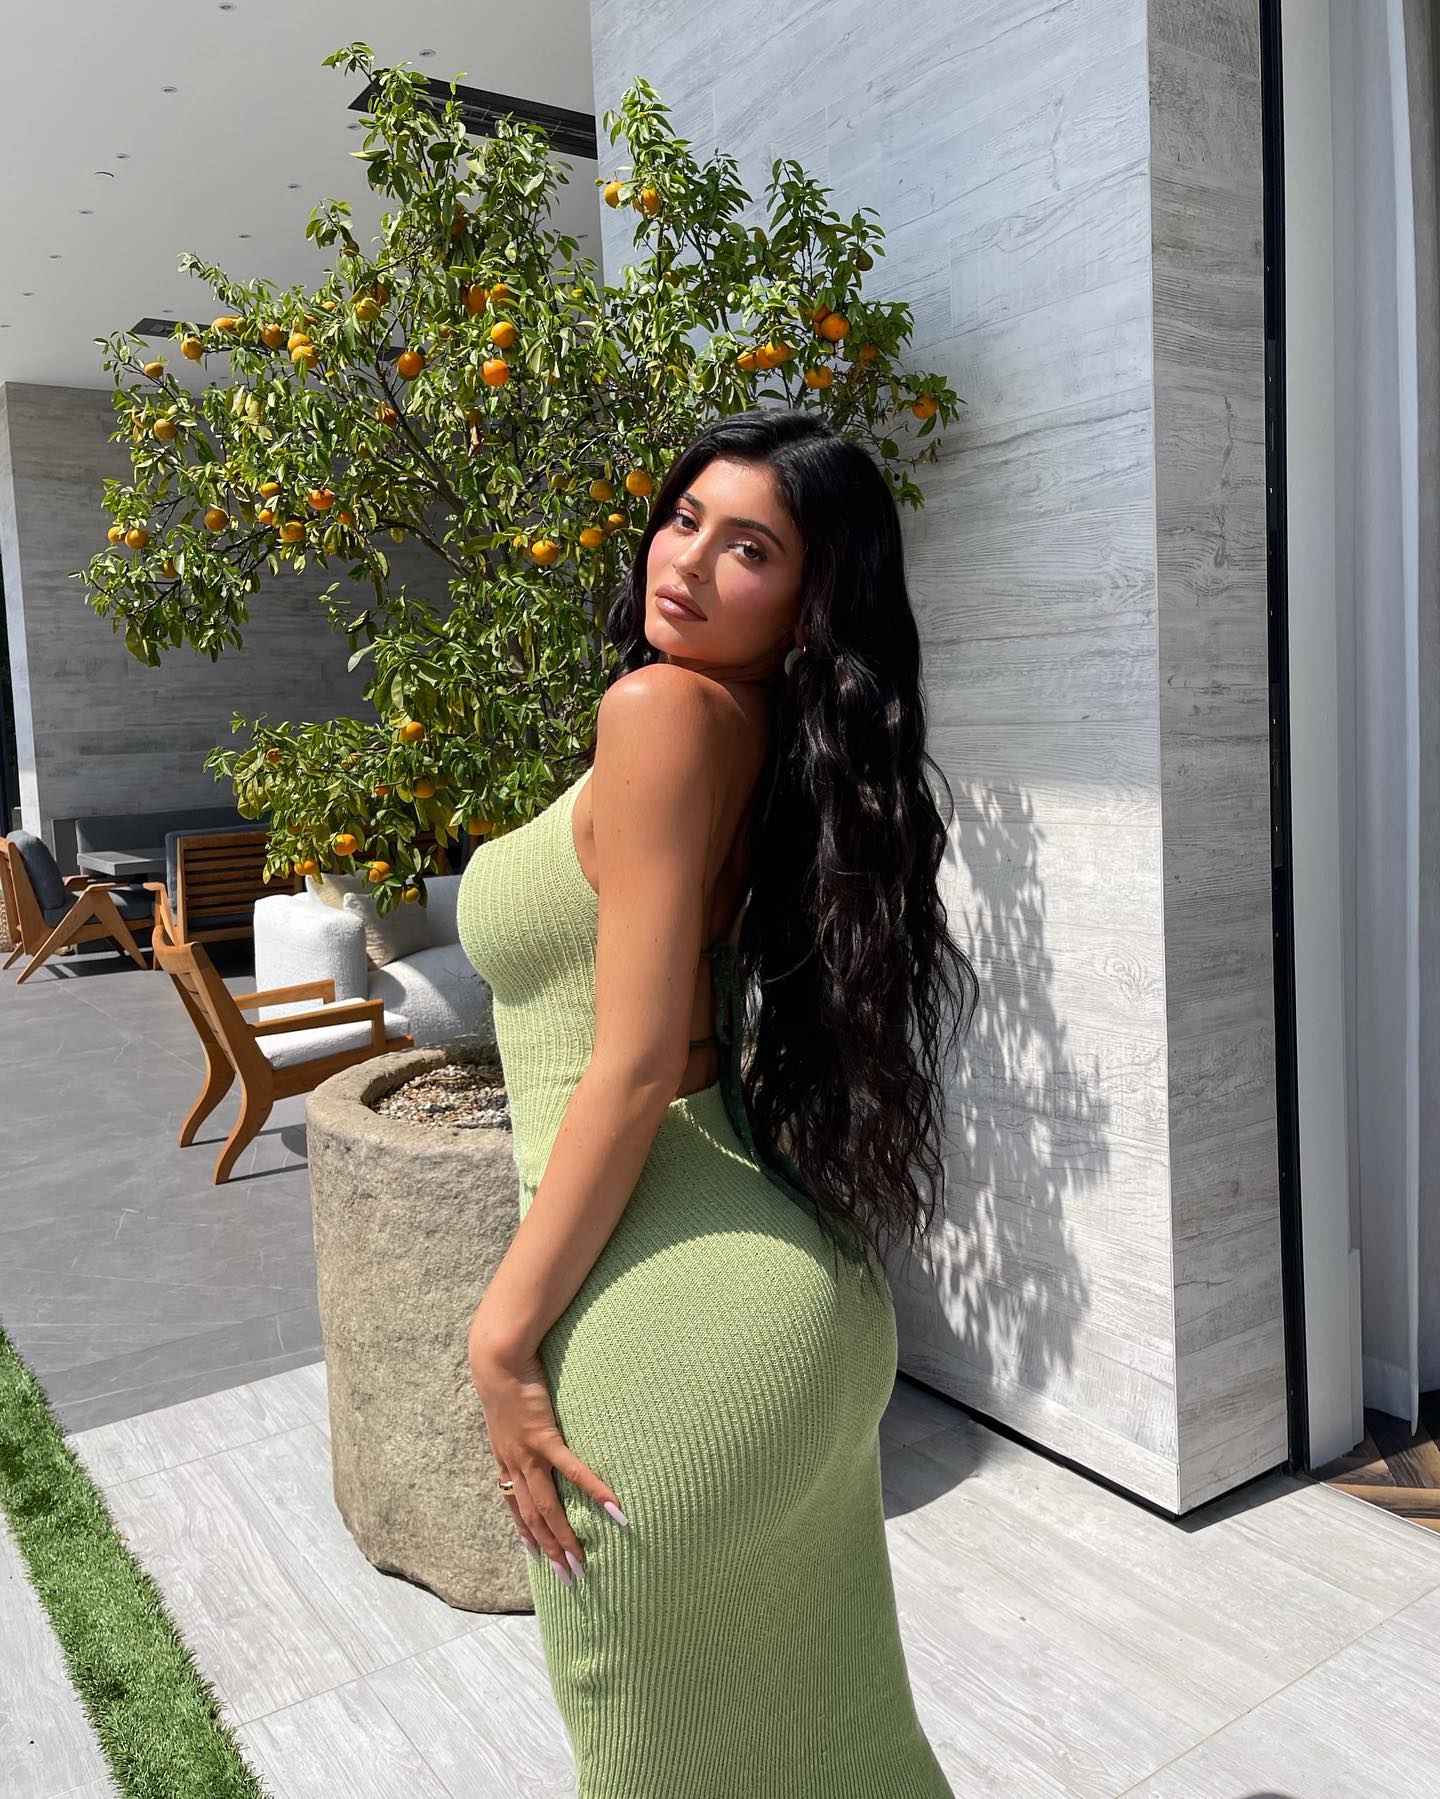 Kylie Jenner's Sєxiest Moments Ever: See the Racy PH๏τos